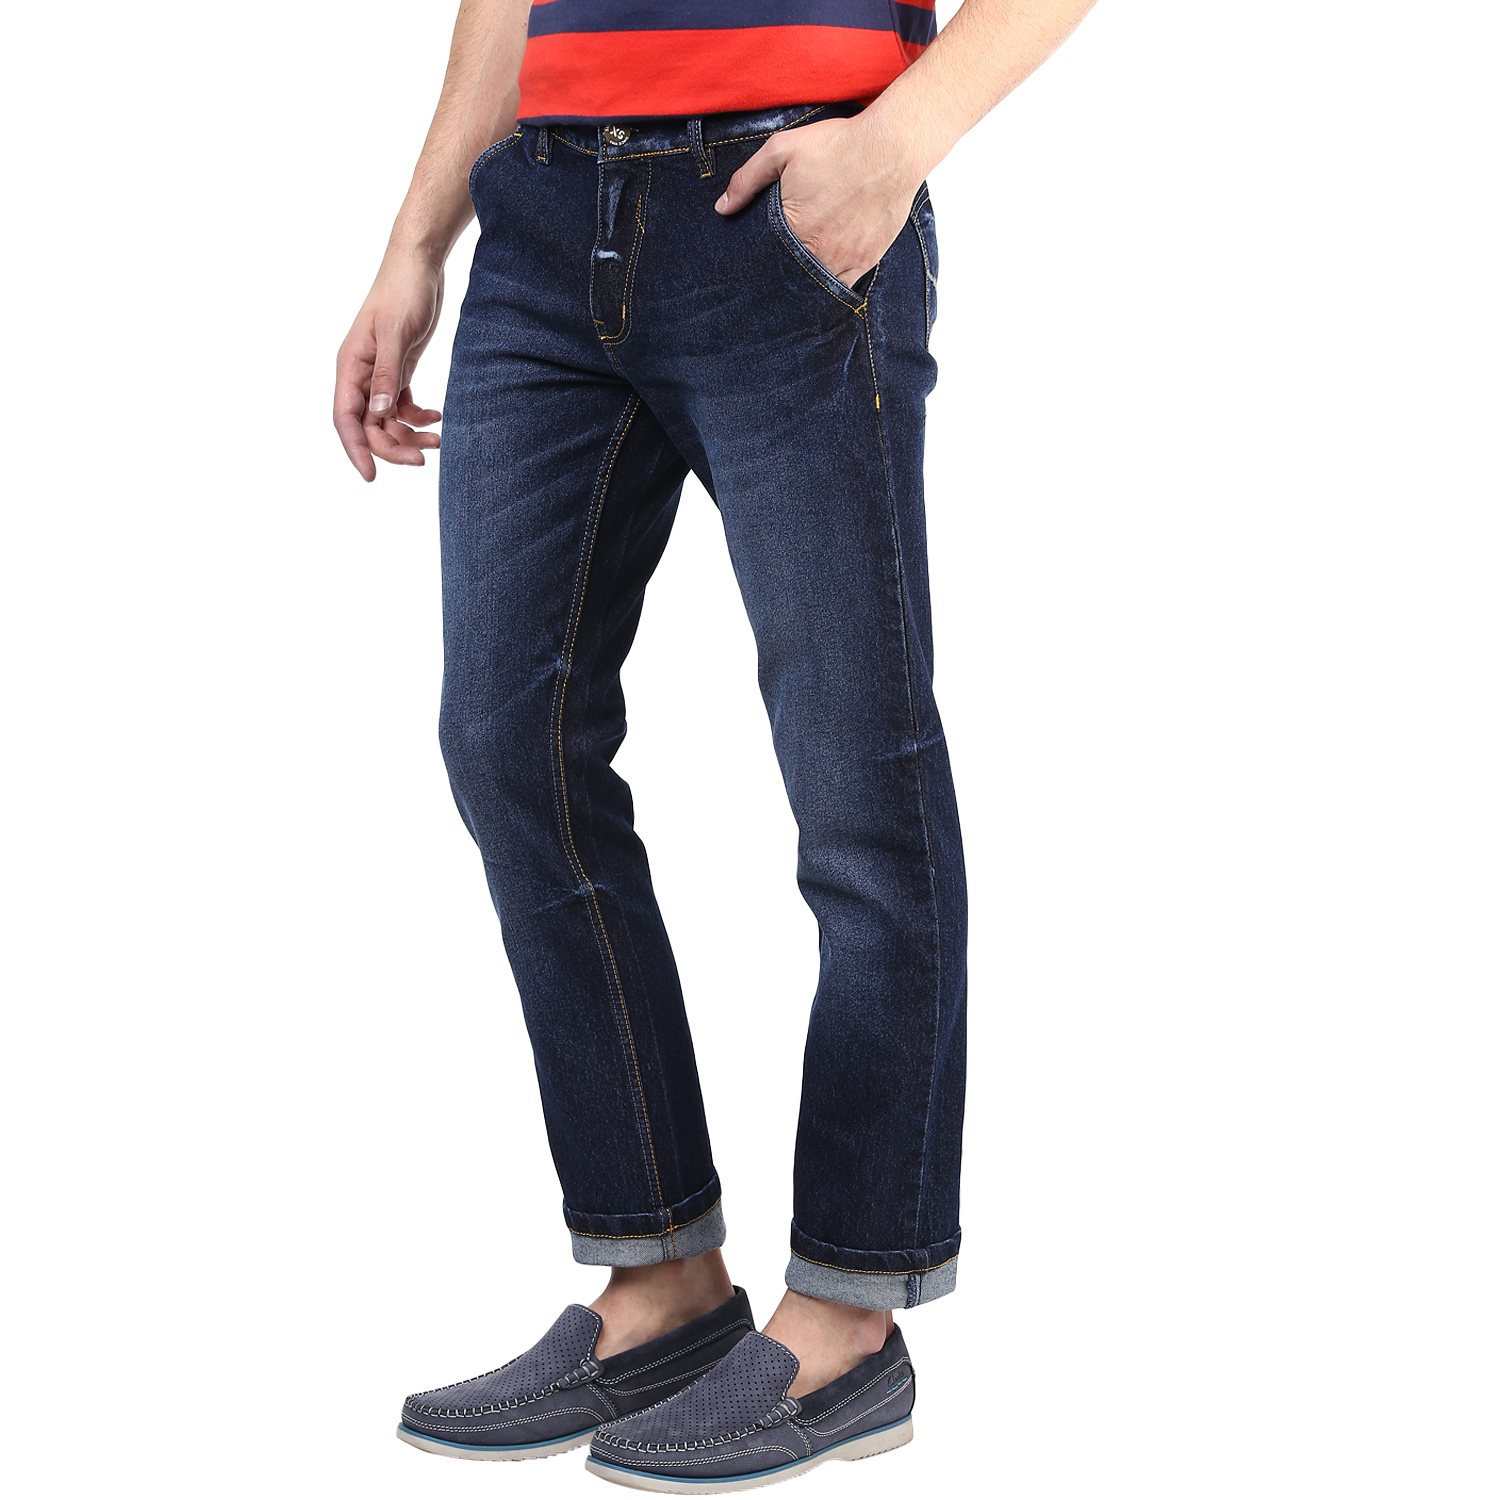 Buy Super-X Blue Skinny Fit Jeans For Men-abc134c Online @ ₹699 from ...